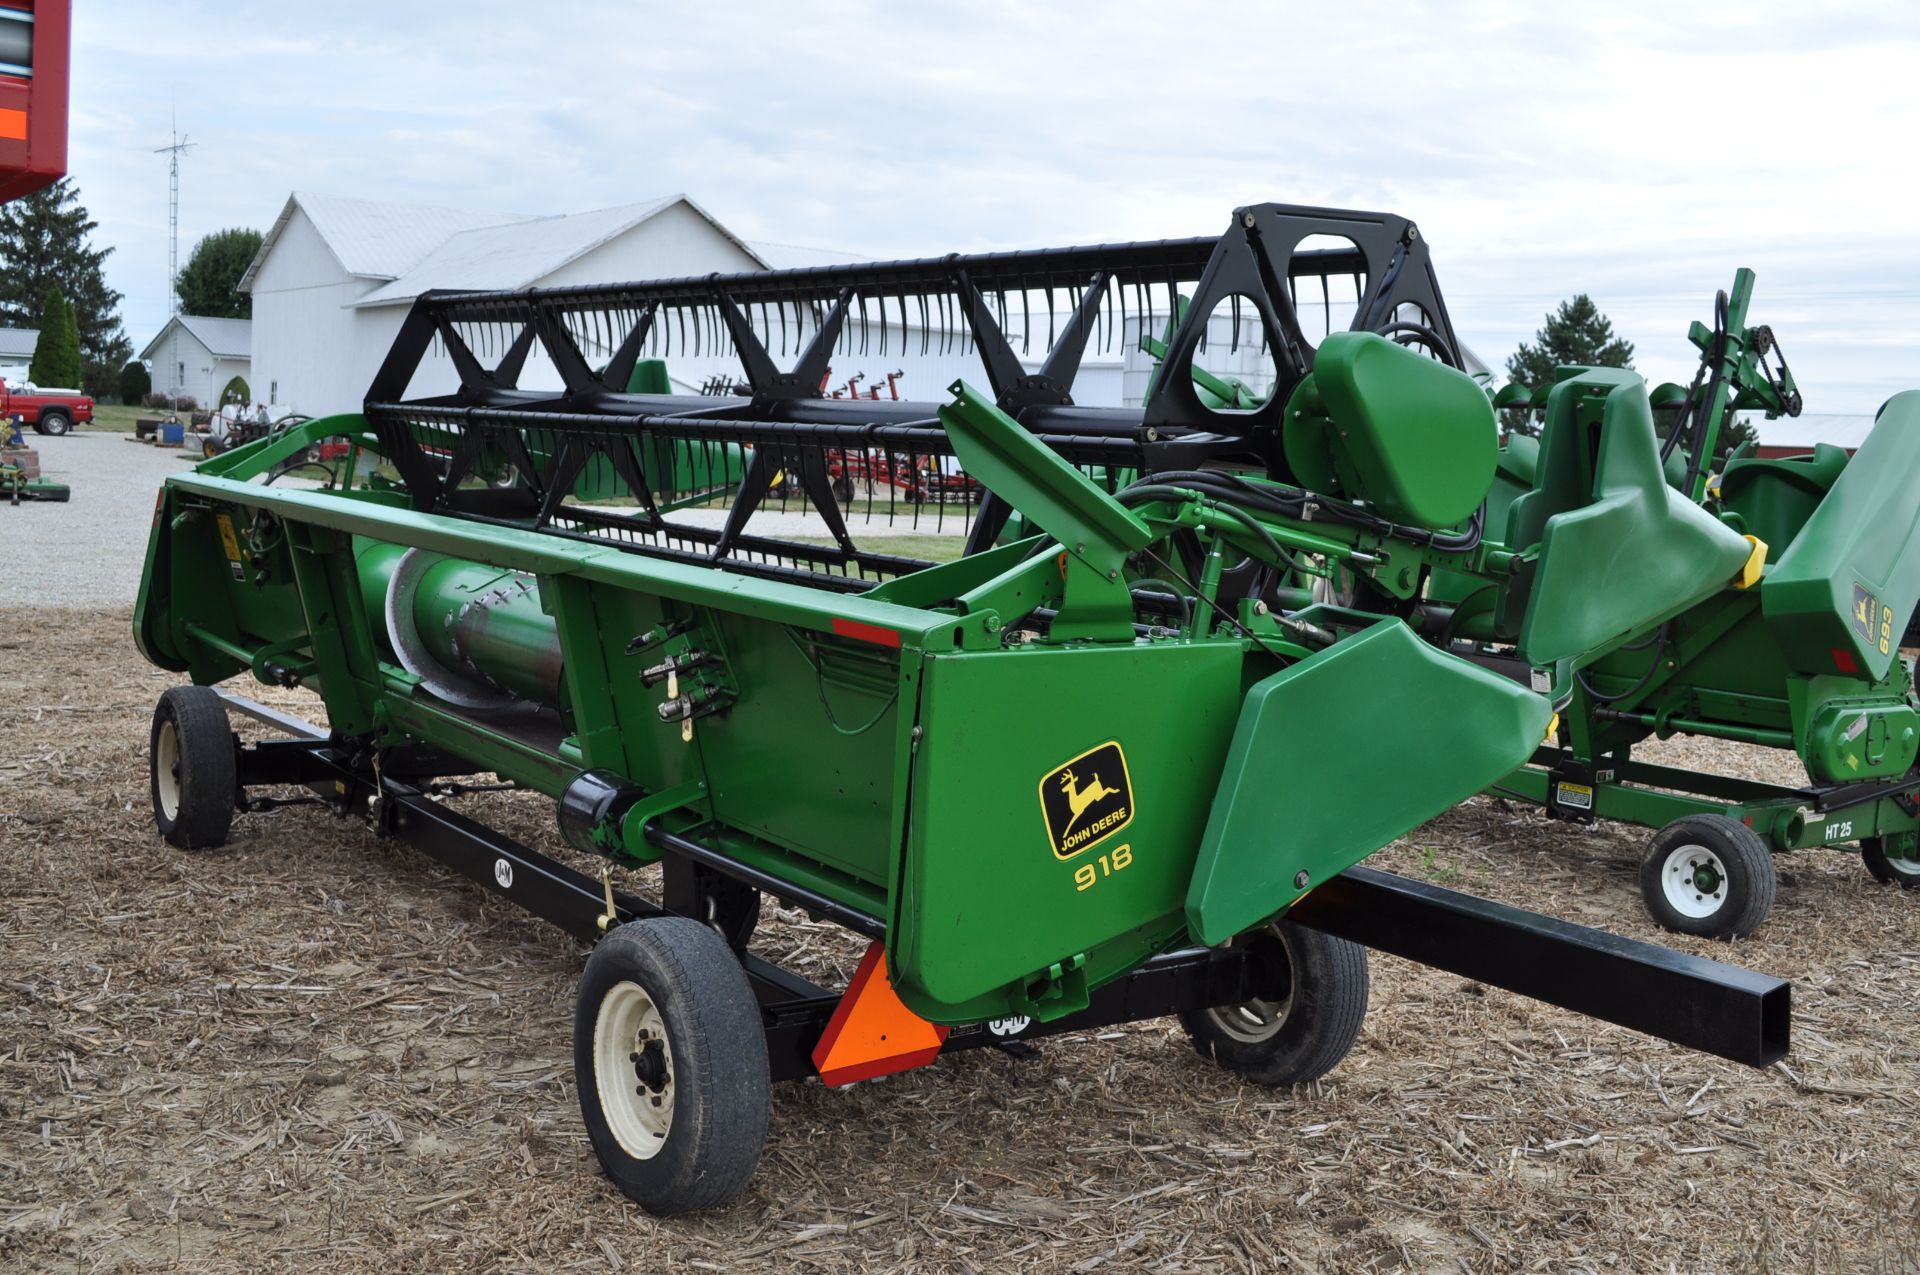 18’ John Deere 918 grain head, hyd fore/aft, row crop dividers, poly skid shoes, SN H00918F670831 - Image 3 of 10